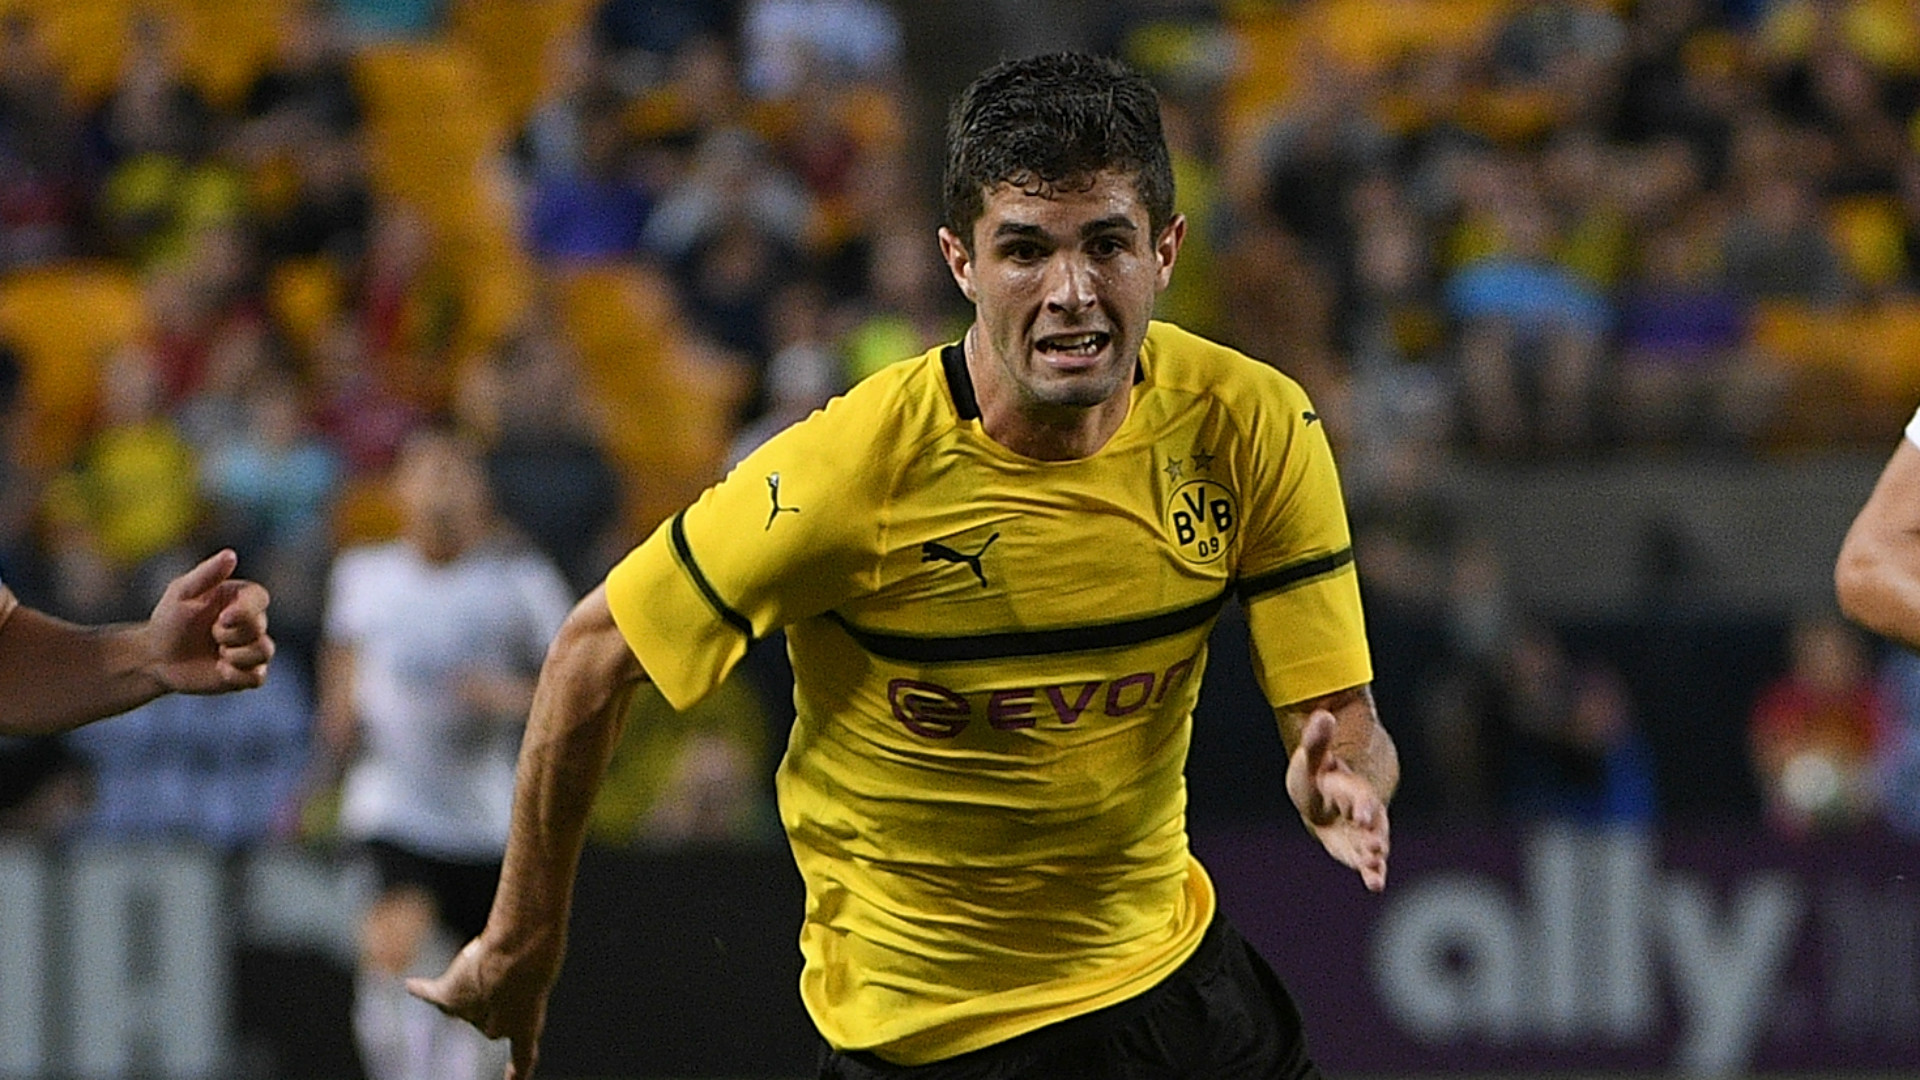 Americans Abroad rewind: Christian Pulisic kicks off his 20s in style